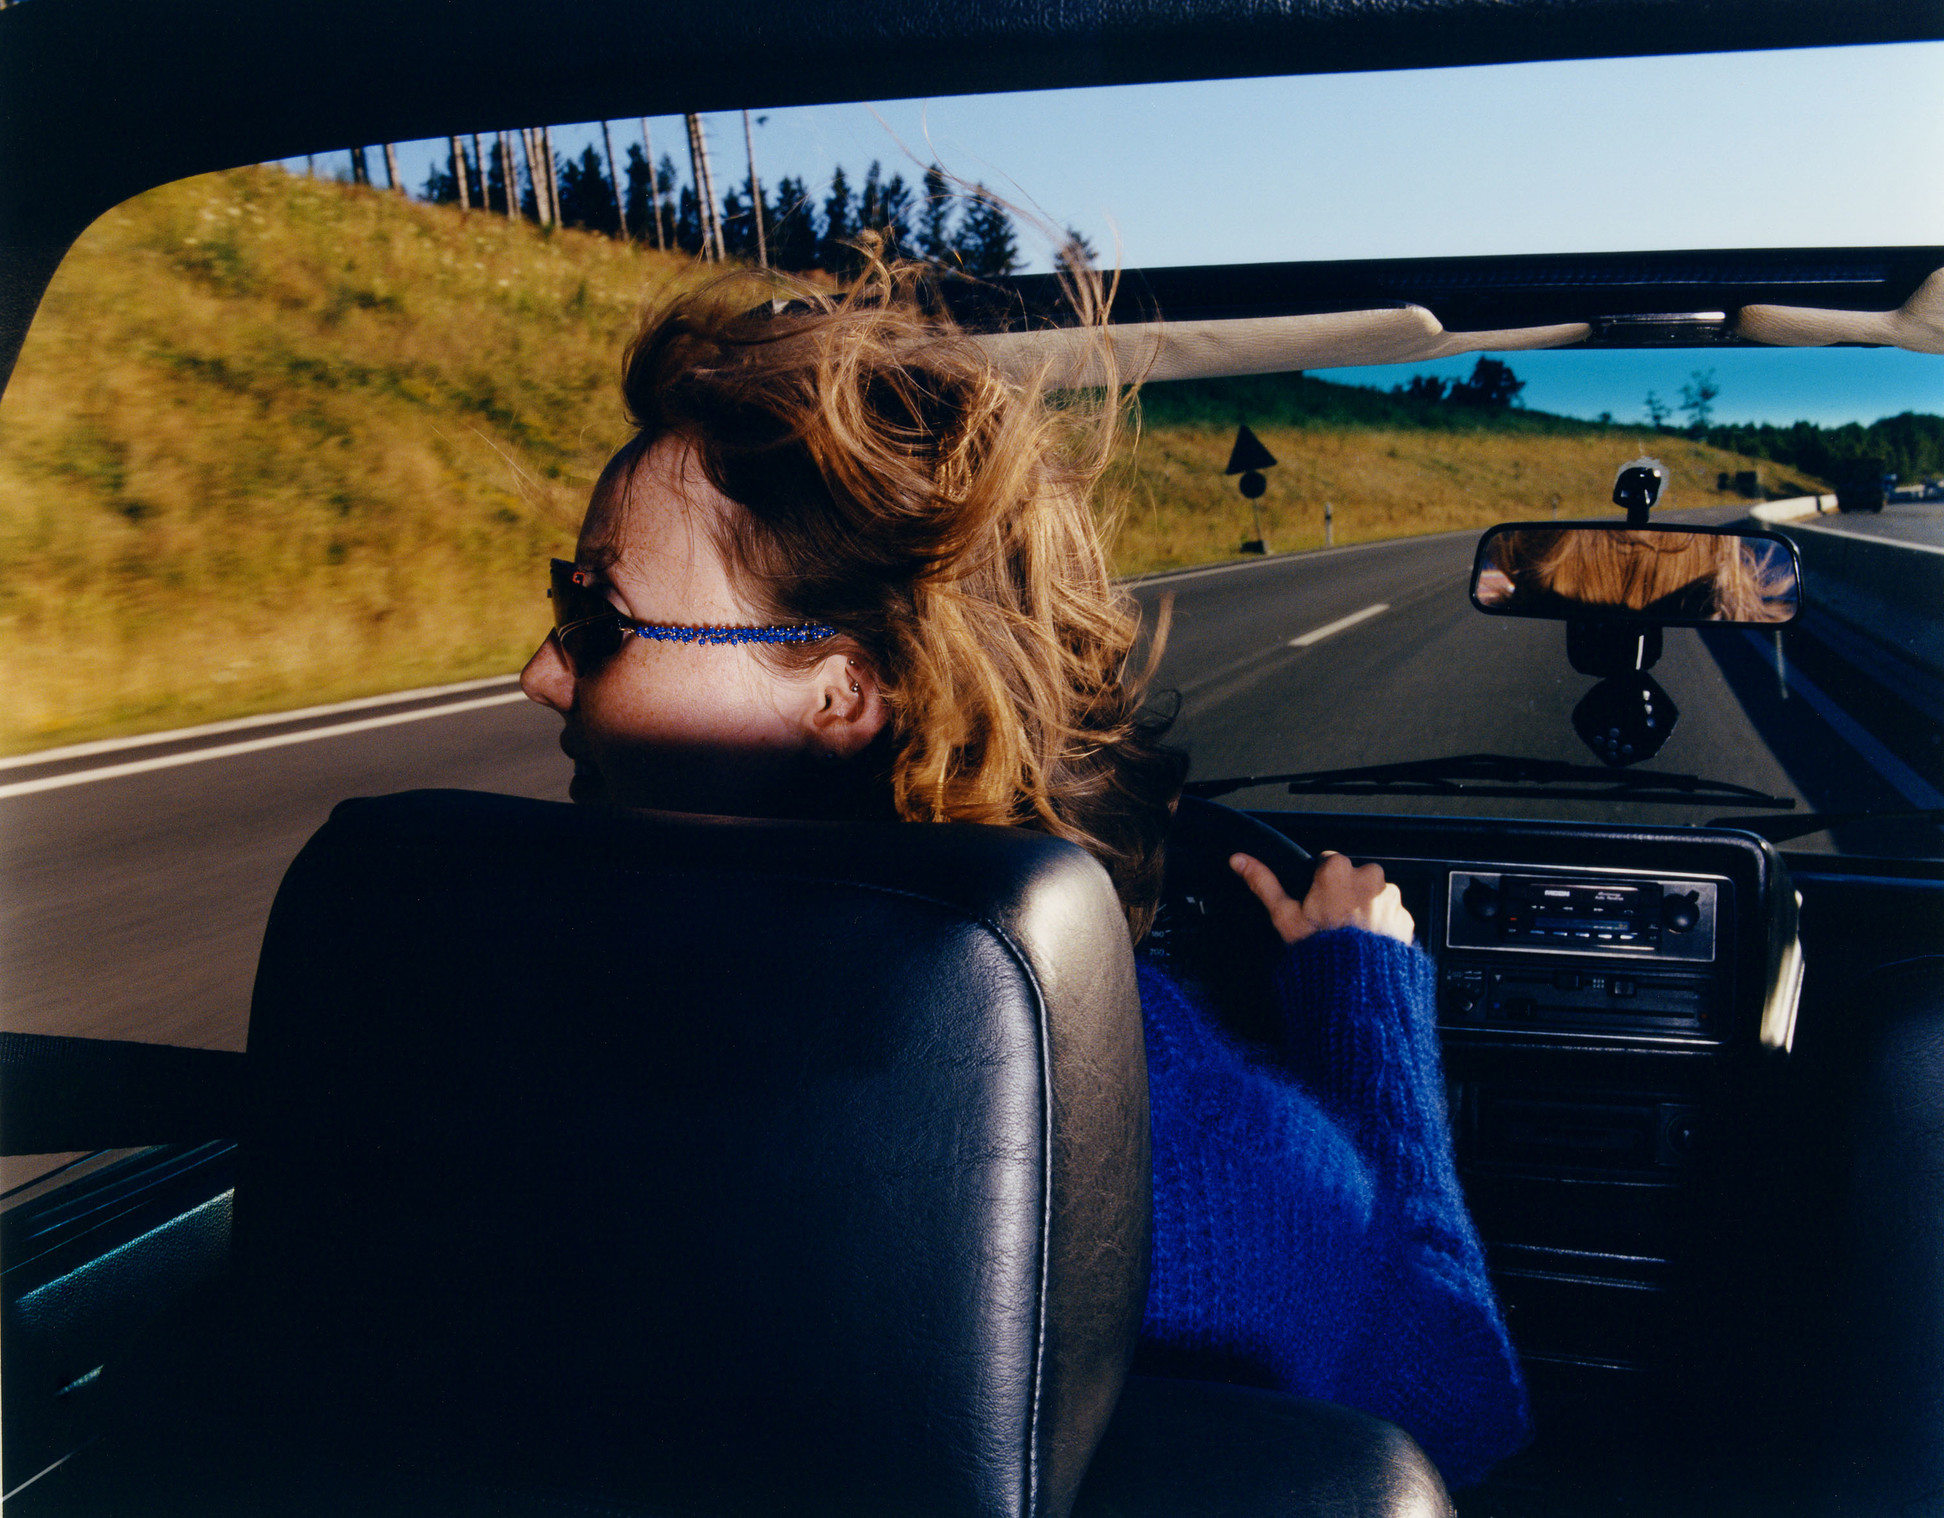 A fashion editorial photographed on the German autobahn,  shot entirely on the go. *{Styling by Samira Fricke. Casting by Affa Osman. Make up by Patrick Glatthaar. Photo assistant : William Fleming}* - © Maciek Pożoga